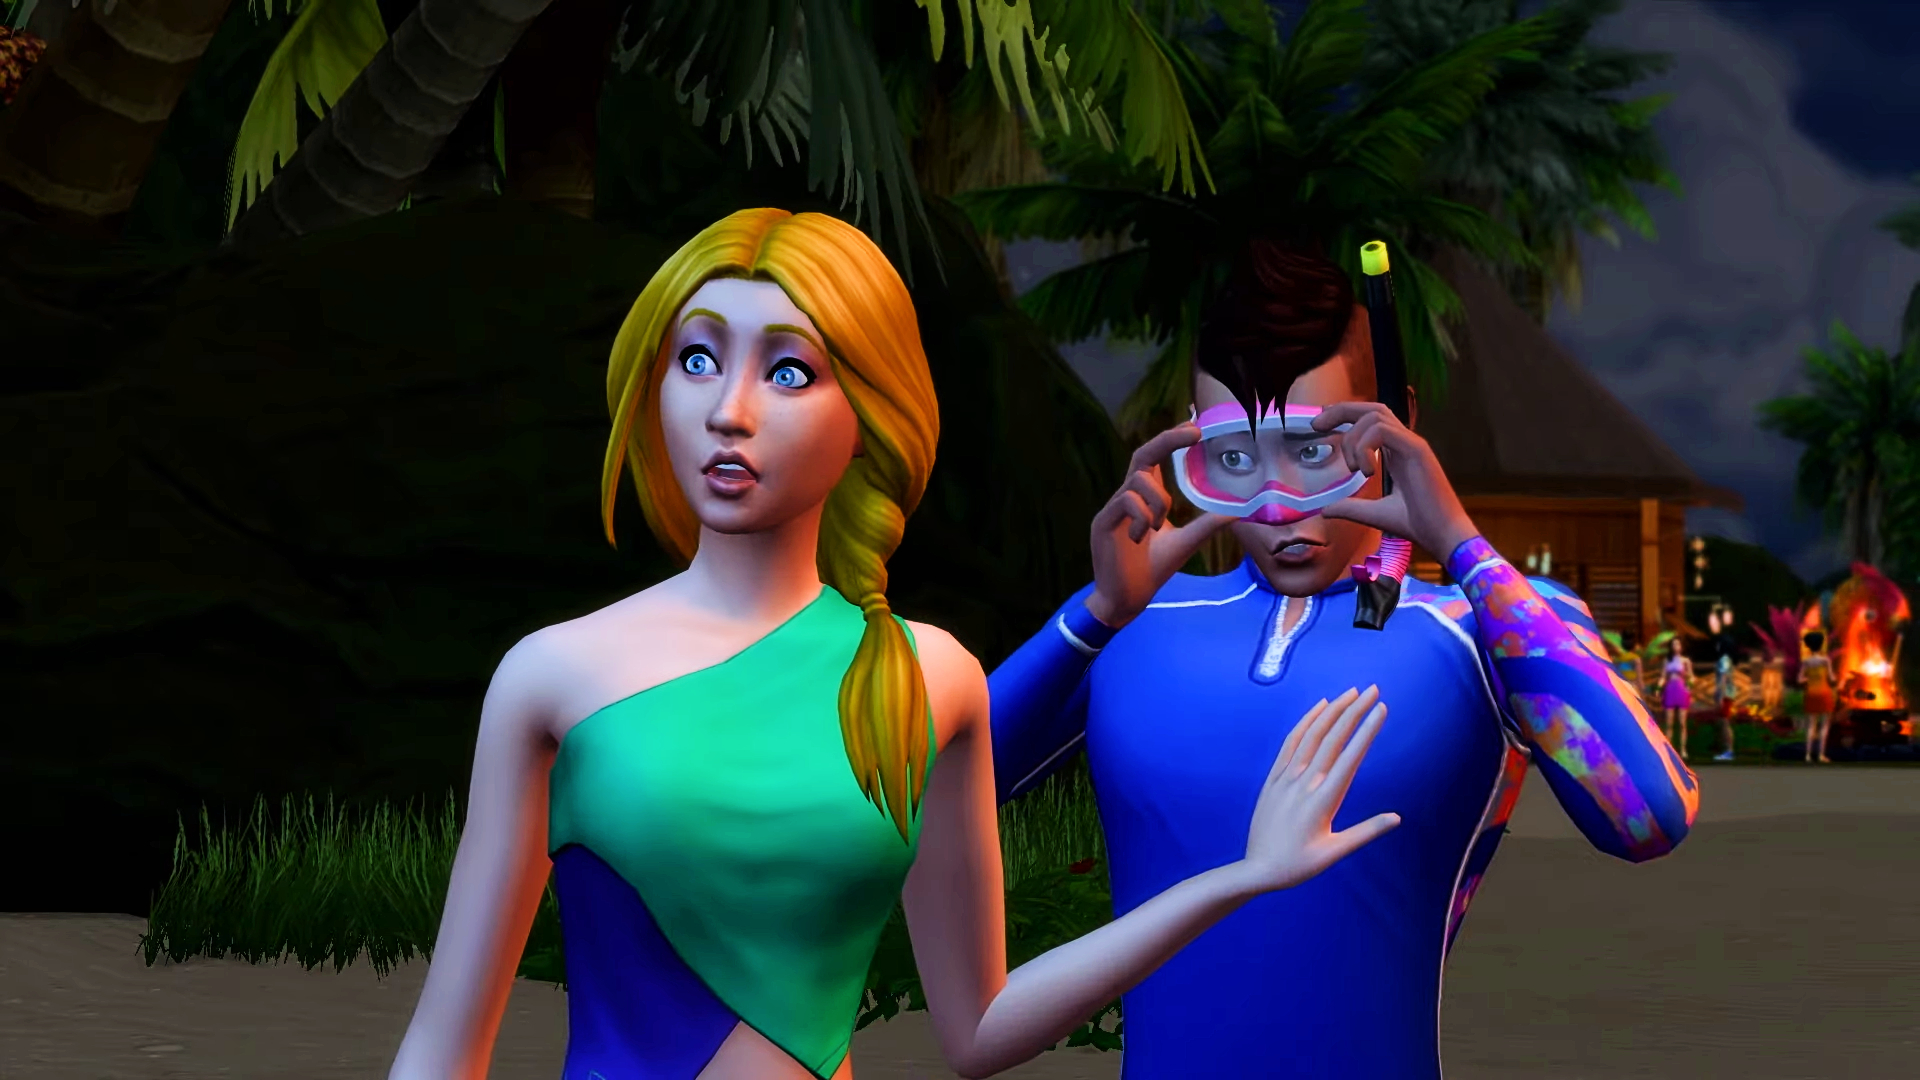 The Sims 4 reveals two new kits, ending the summer with a splash